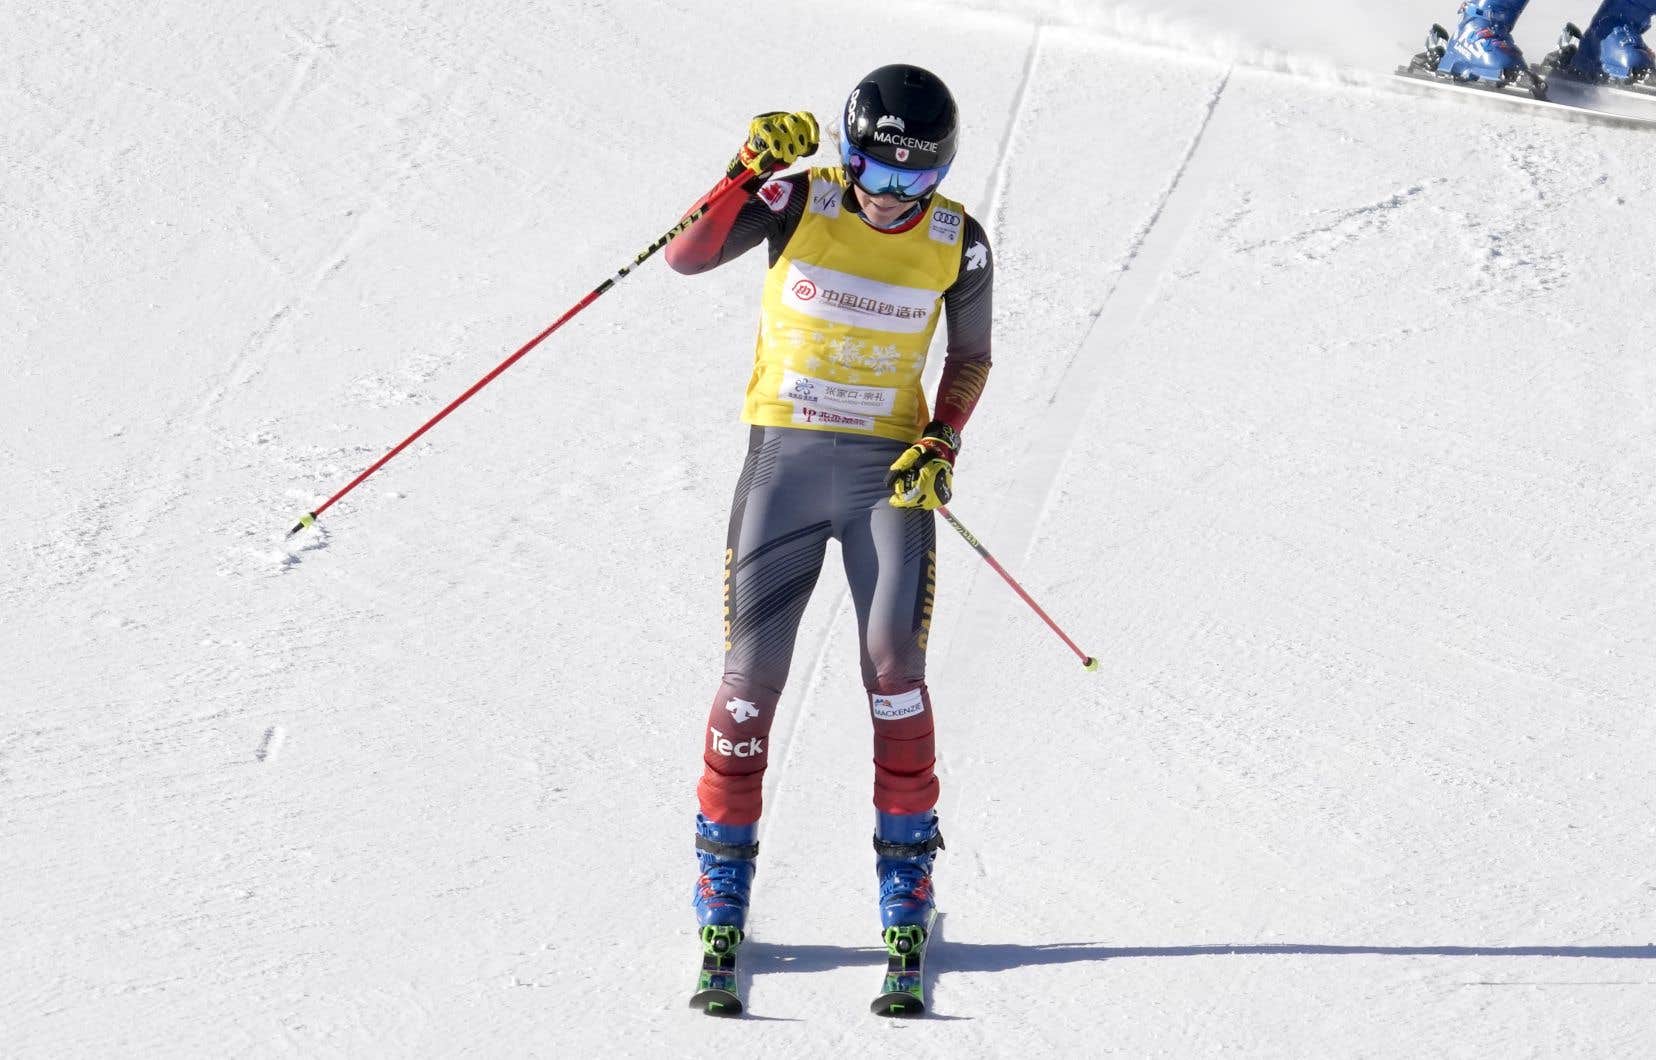 Ski Cross: two bronze medals for Canada

